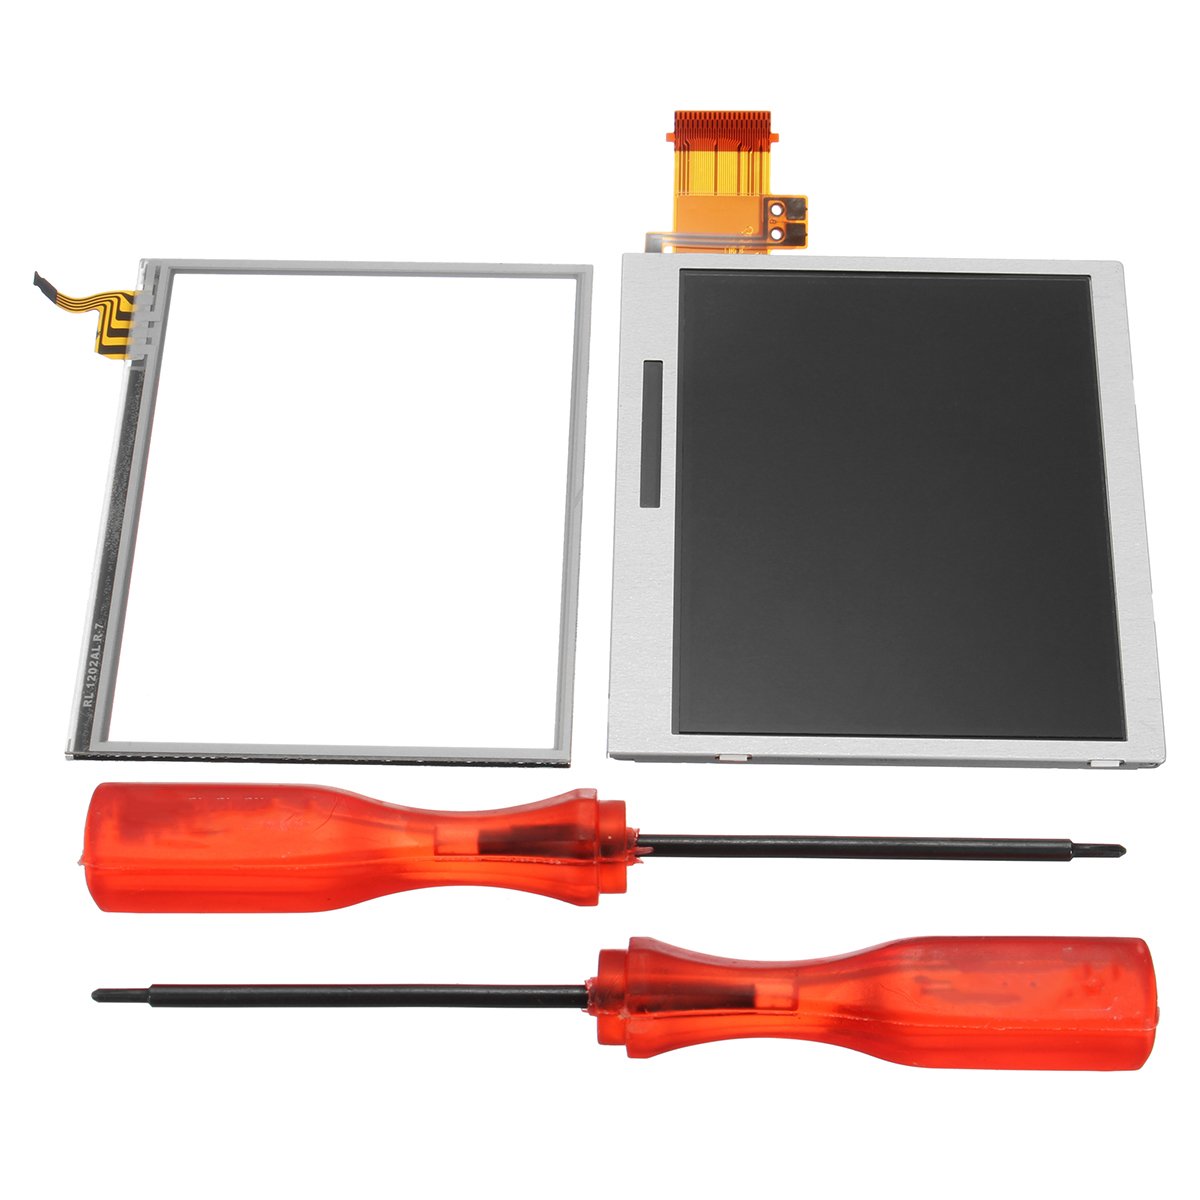 Bottom LCD Display Touch Screen Replacement Tool For Nintendo DS Lite DSL NDSL 2